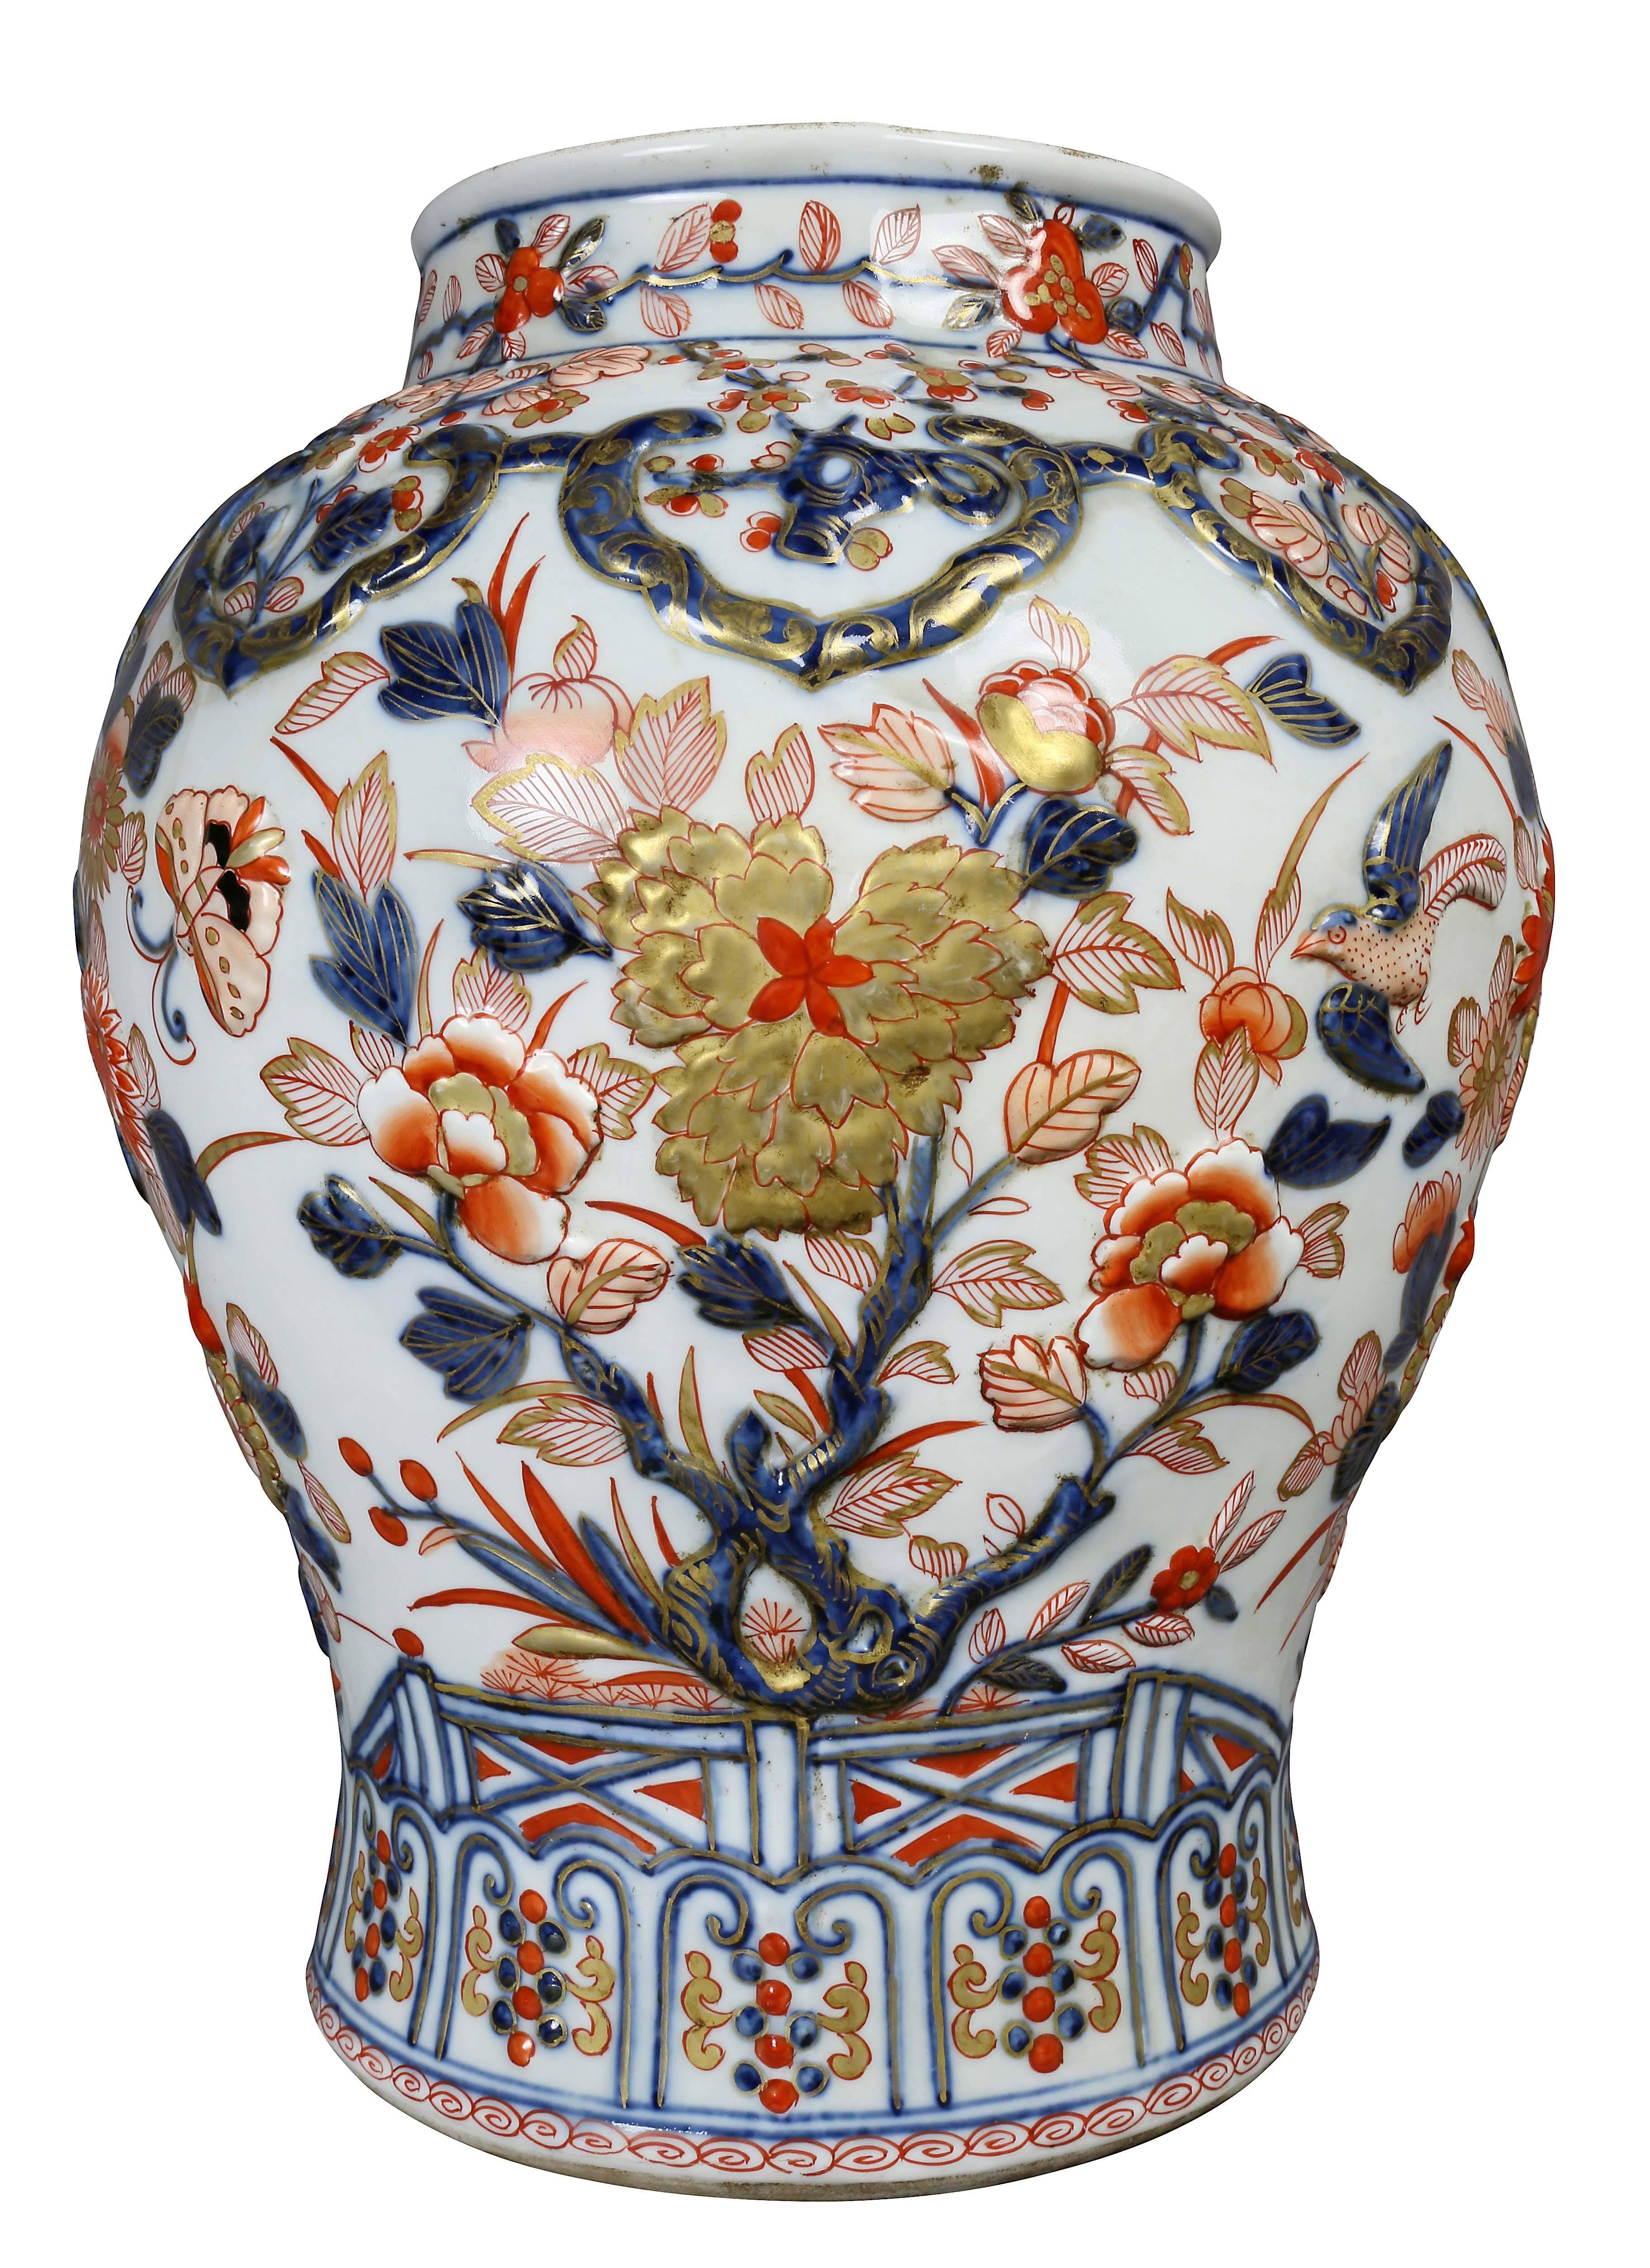 Each with finial and domed covers and baluster body. Raised decoration in the Imari pattern.